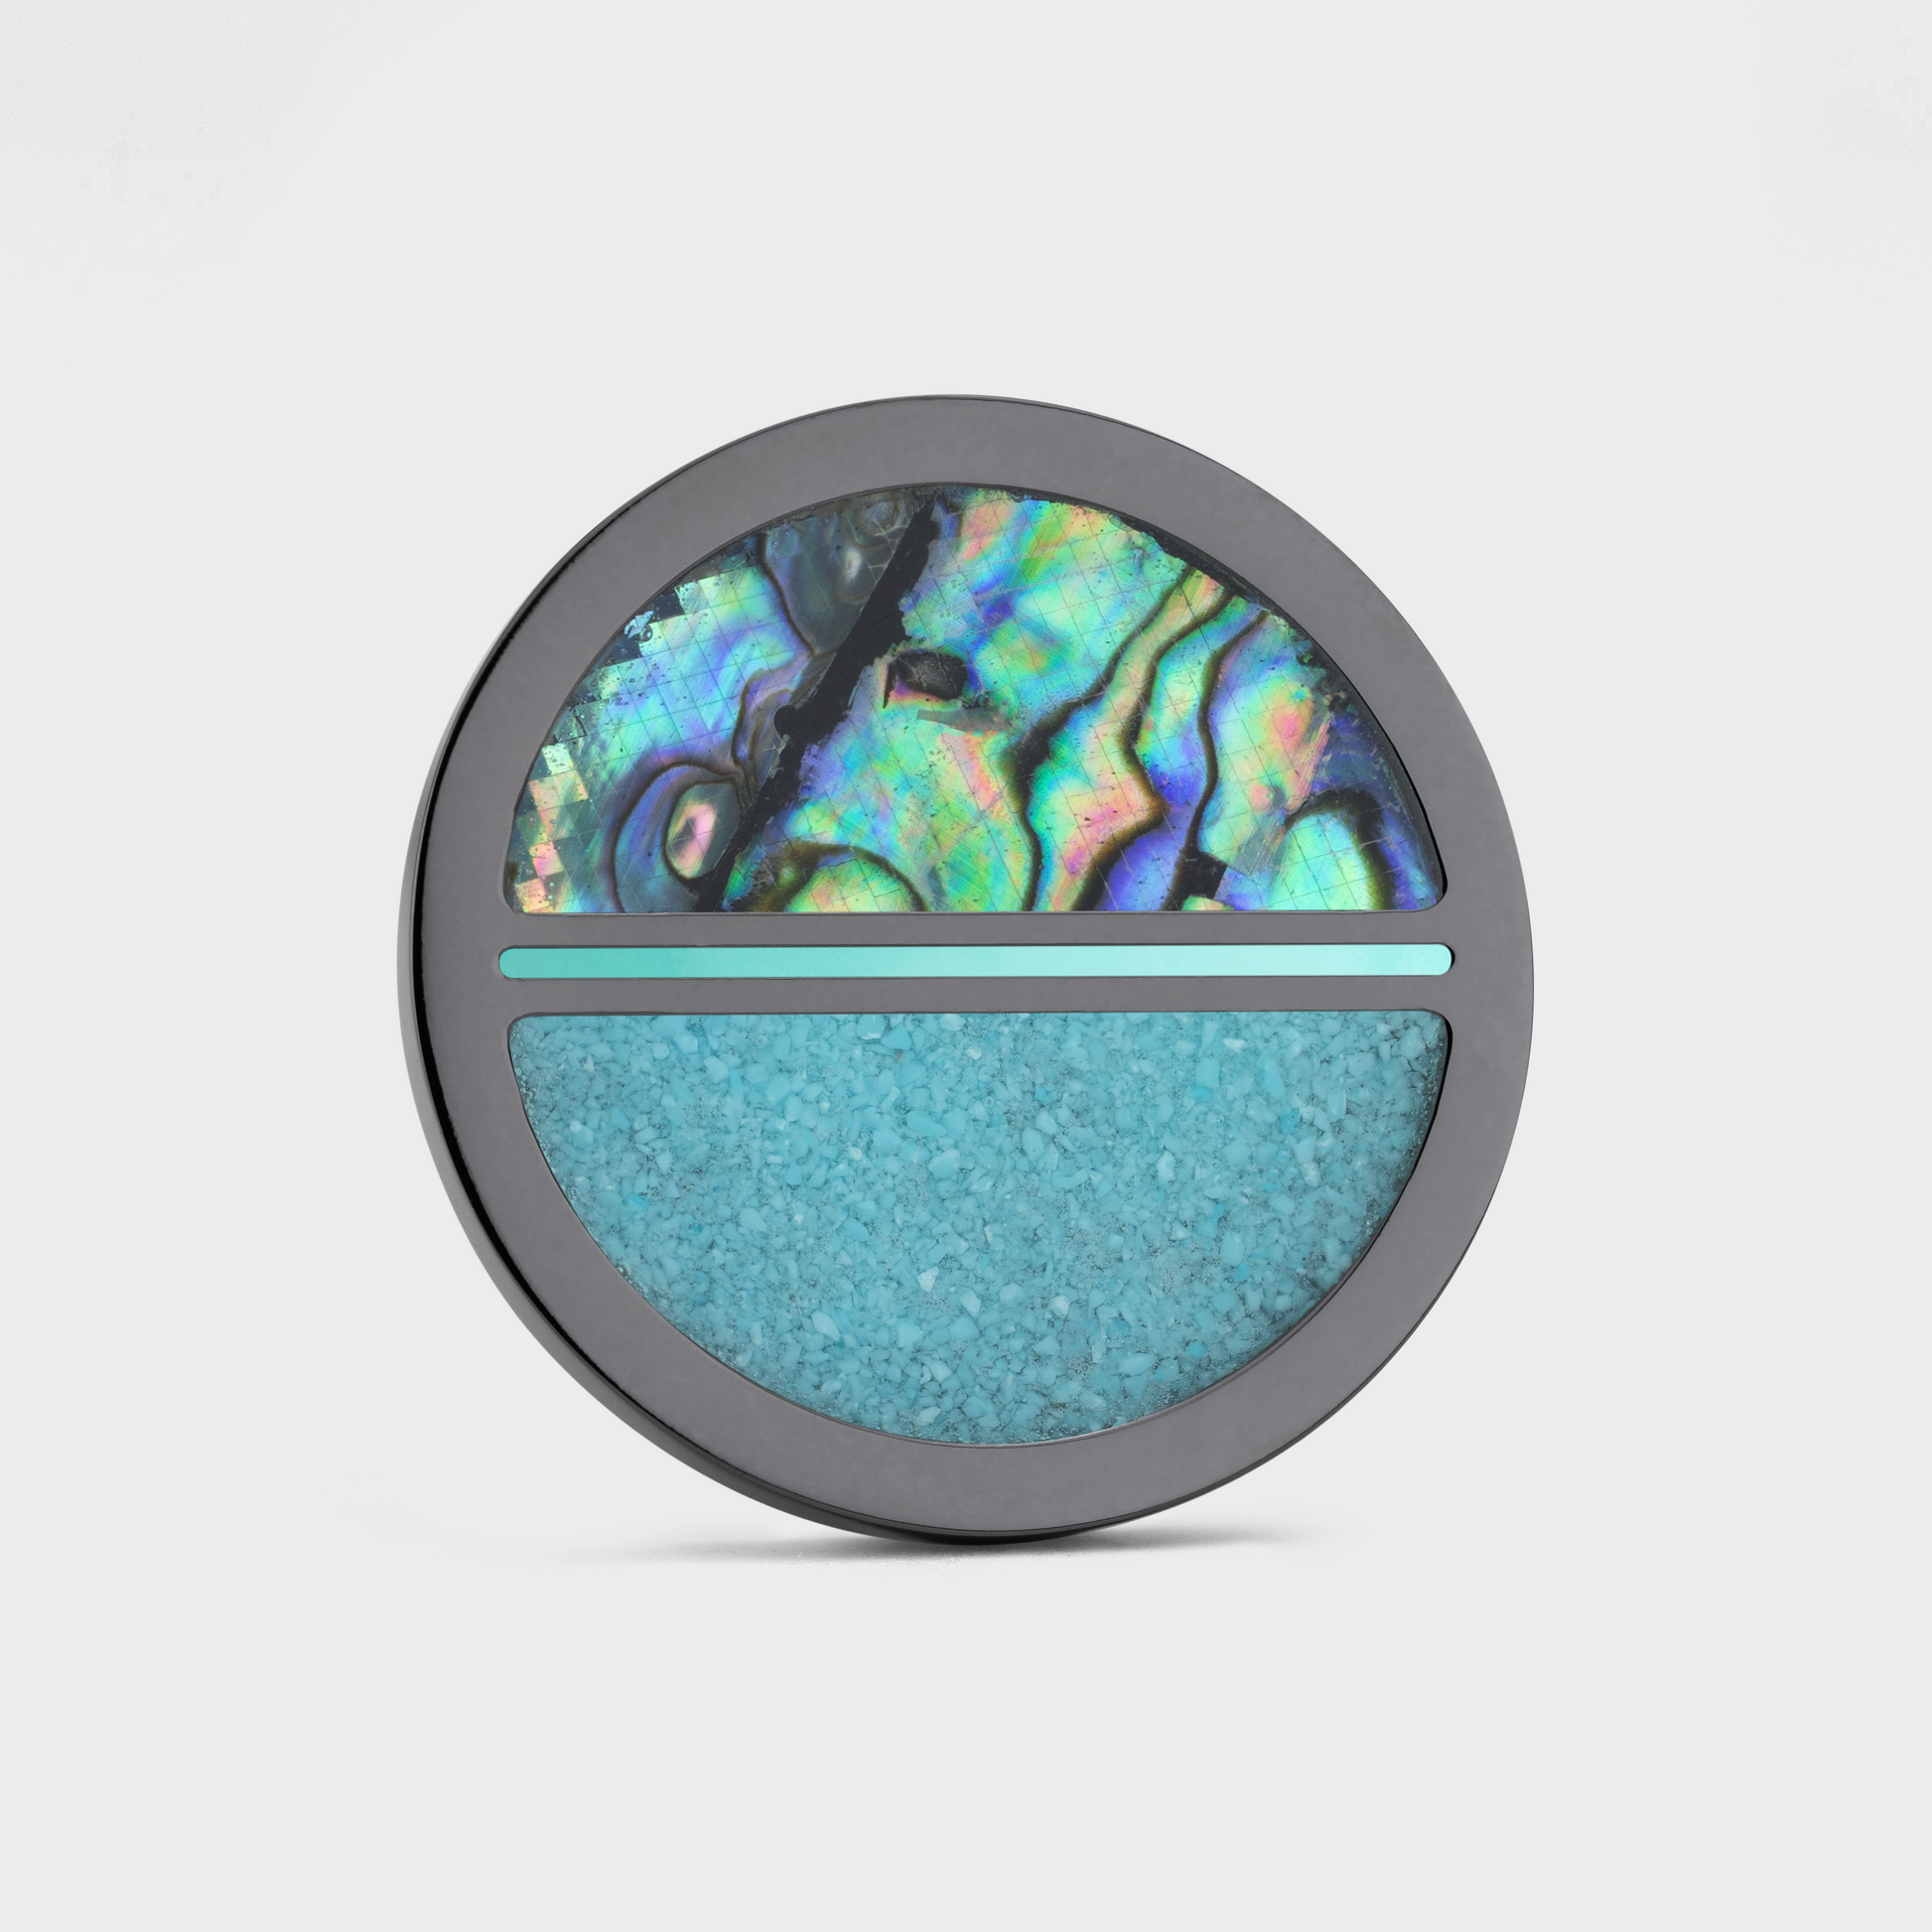 Luxury golf ball marker set in Black Titanium with Abalone & Turquoise